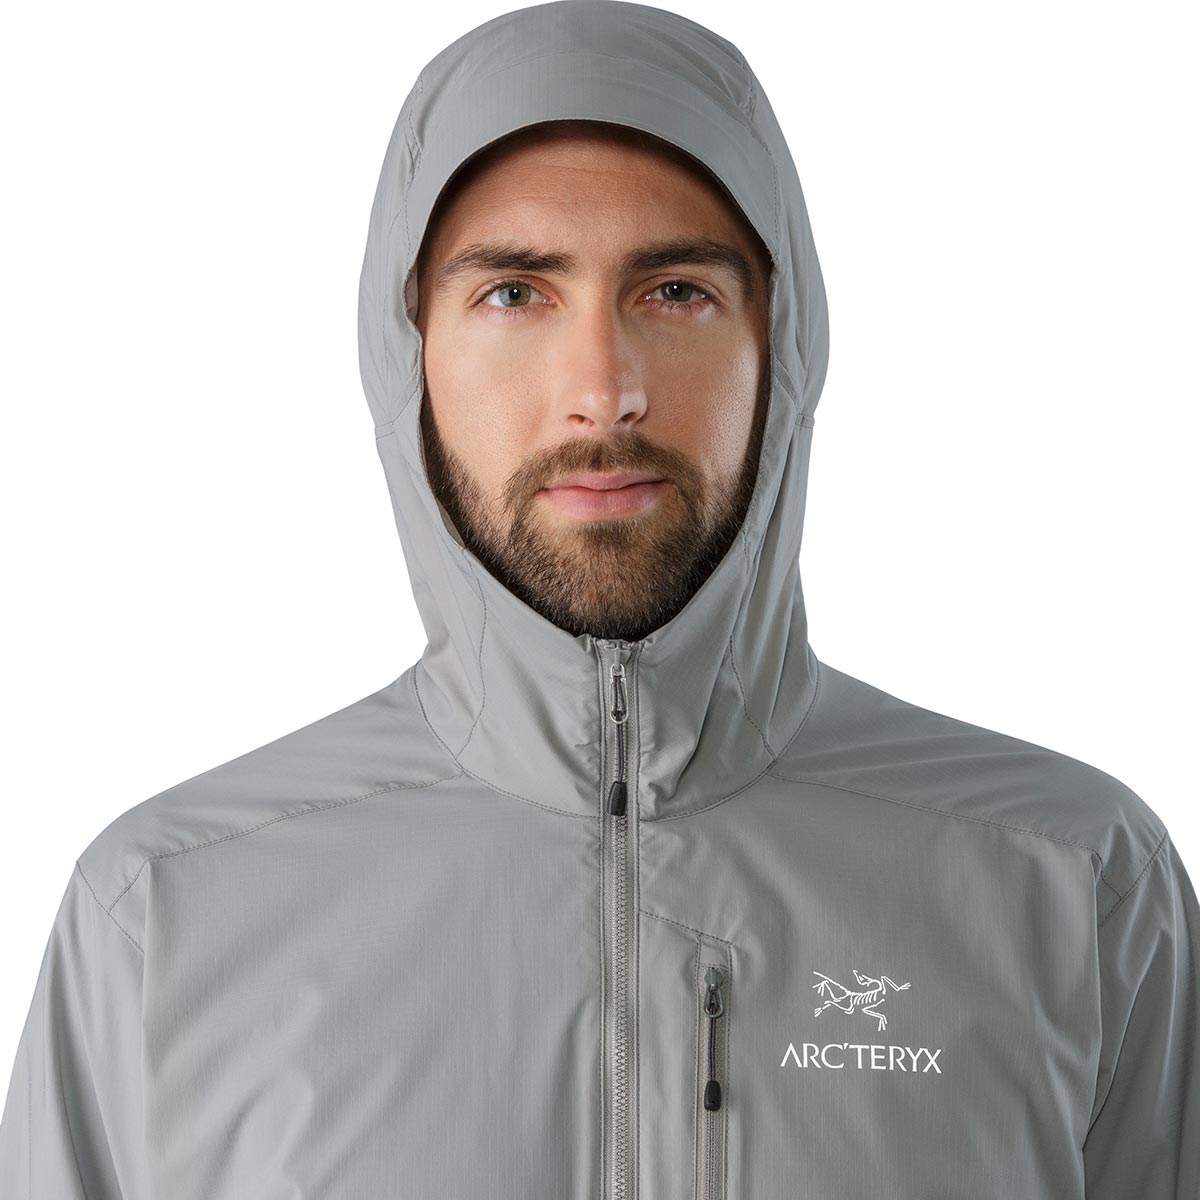 Arc'teryx Squamish Hoody, men's, discontinued Fall 2017 colors (free ...